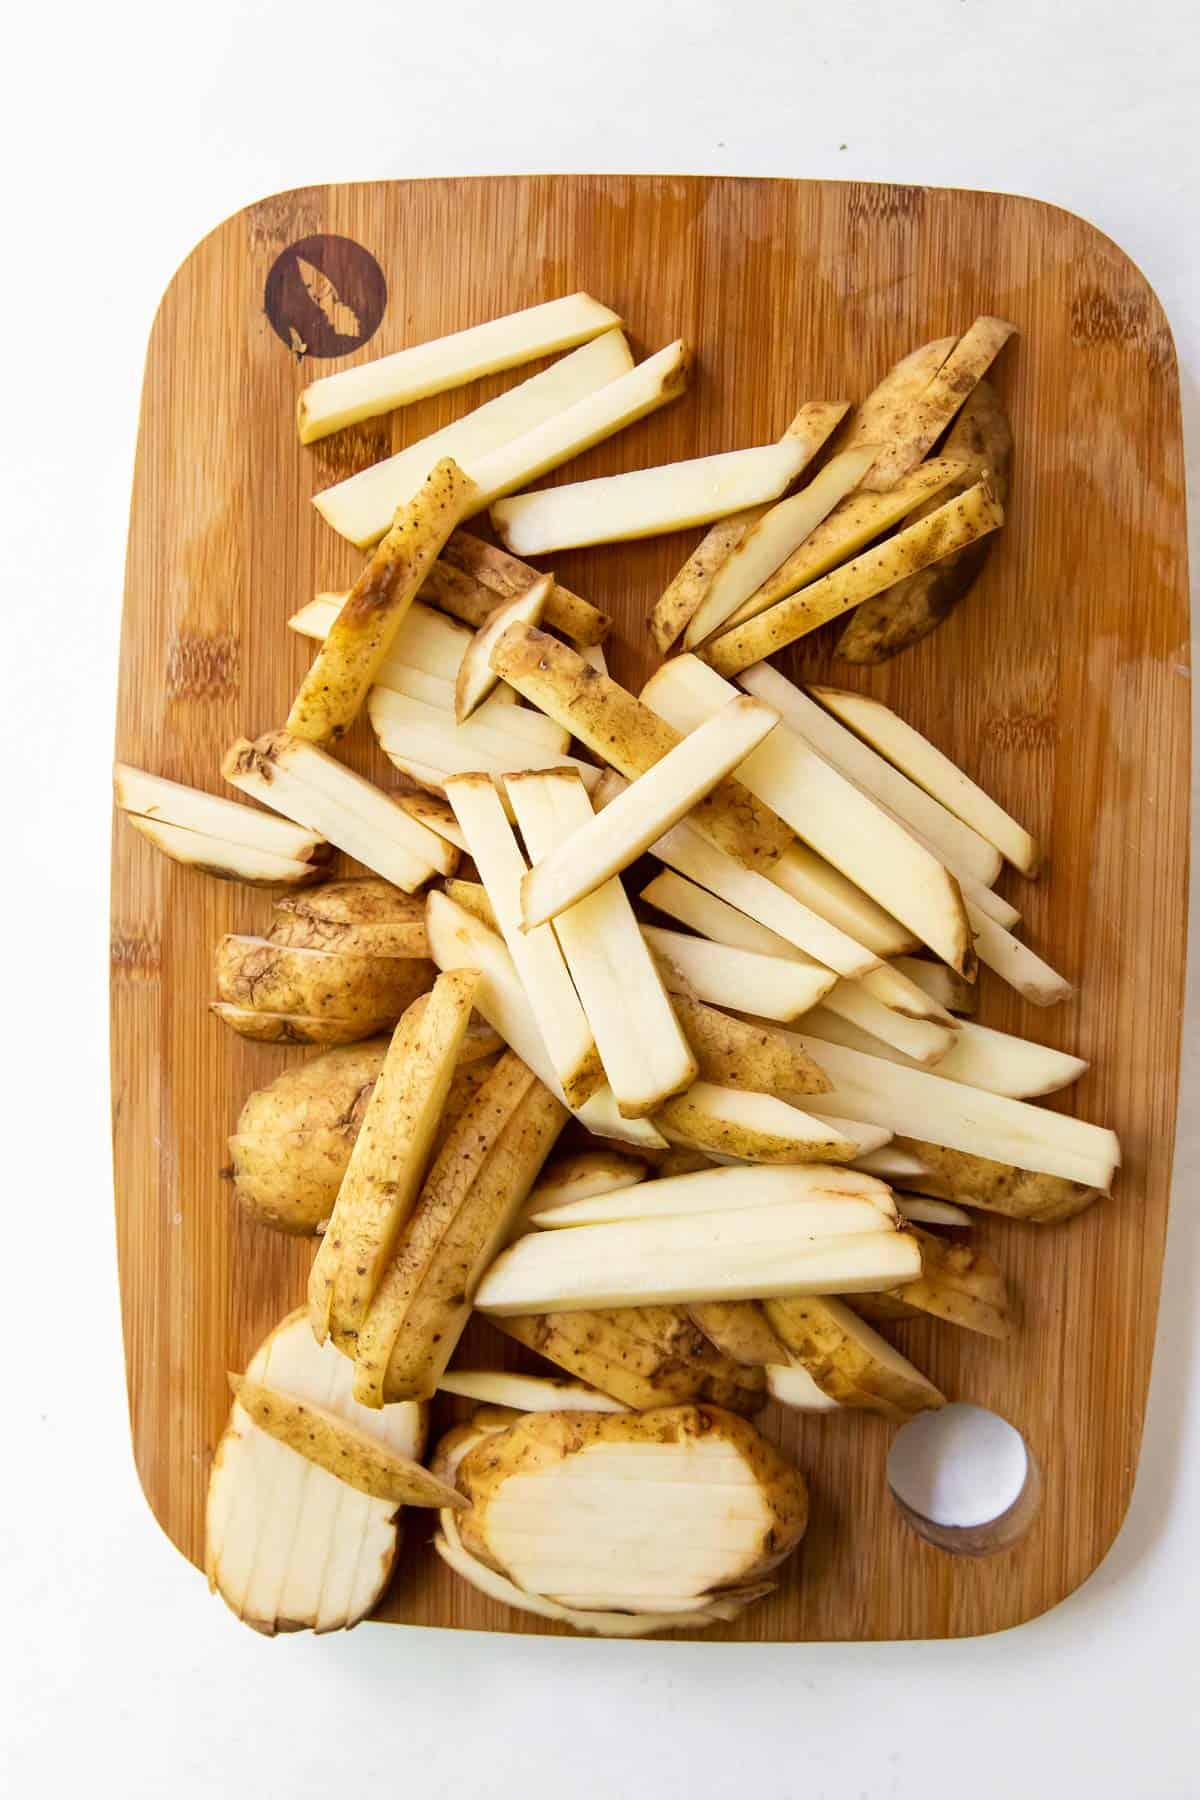 Potatoes sliced into thin fries with skins on on a wooden cutting board. 